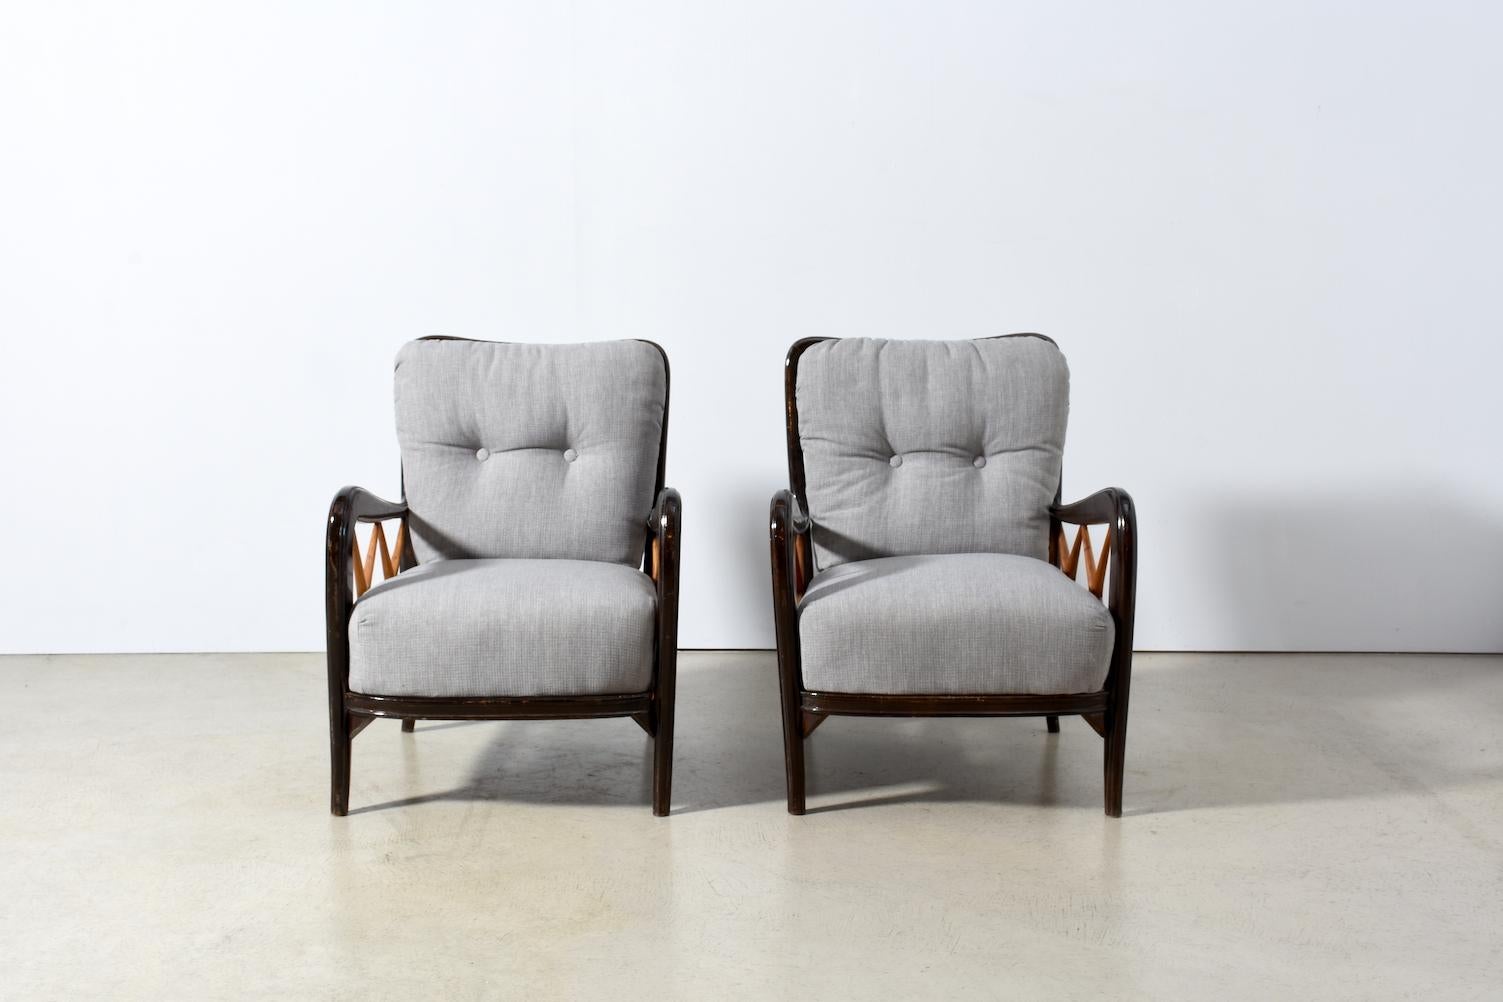 Armchairs with beautiful details in the chair structure. Classic elegance of the Italian, circa 1940s. Newly made pillows. Only for sale as pair.